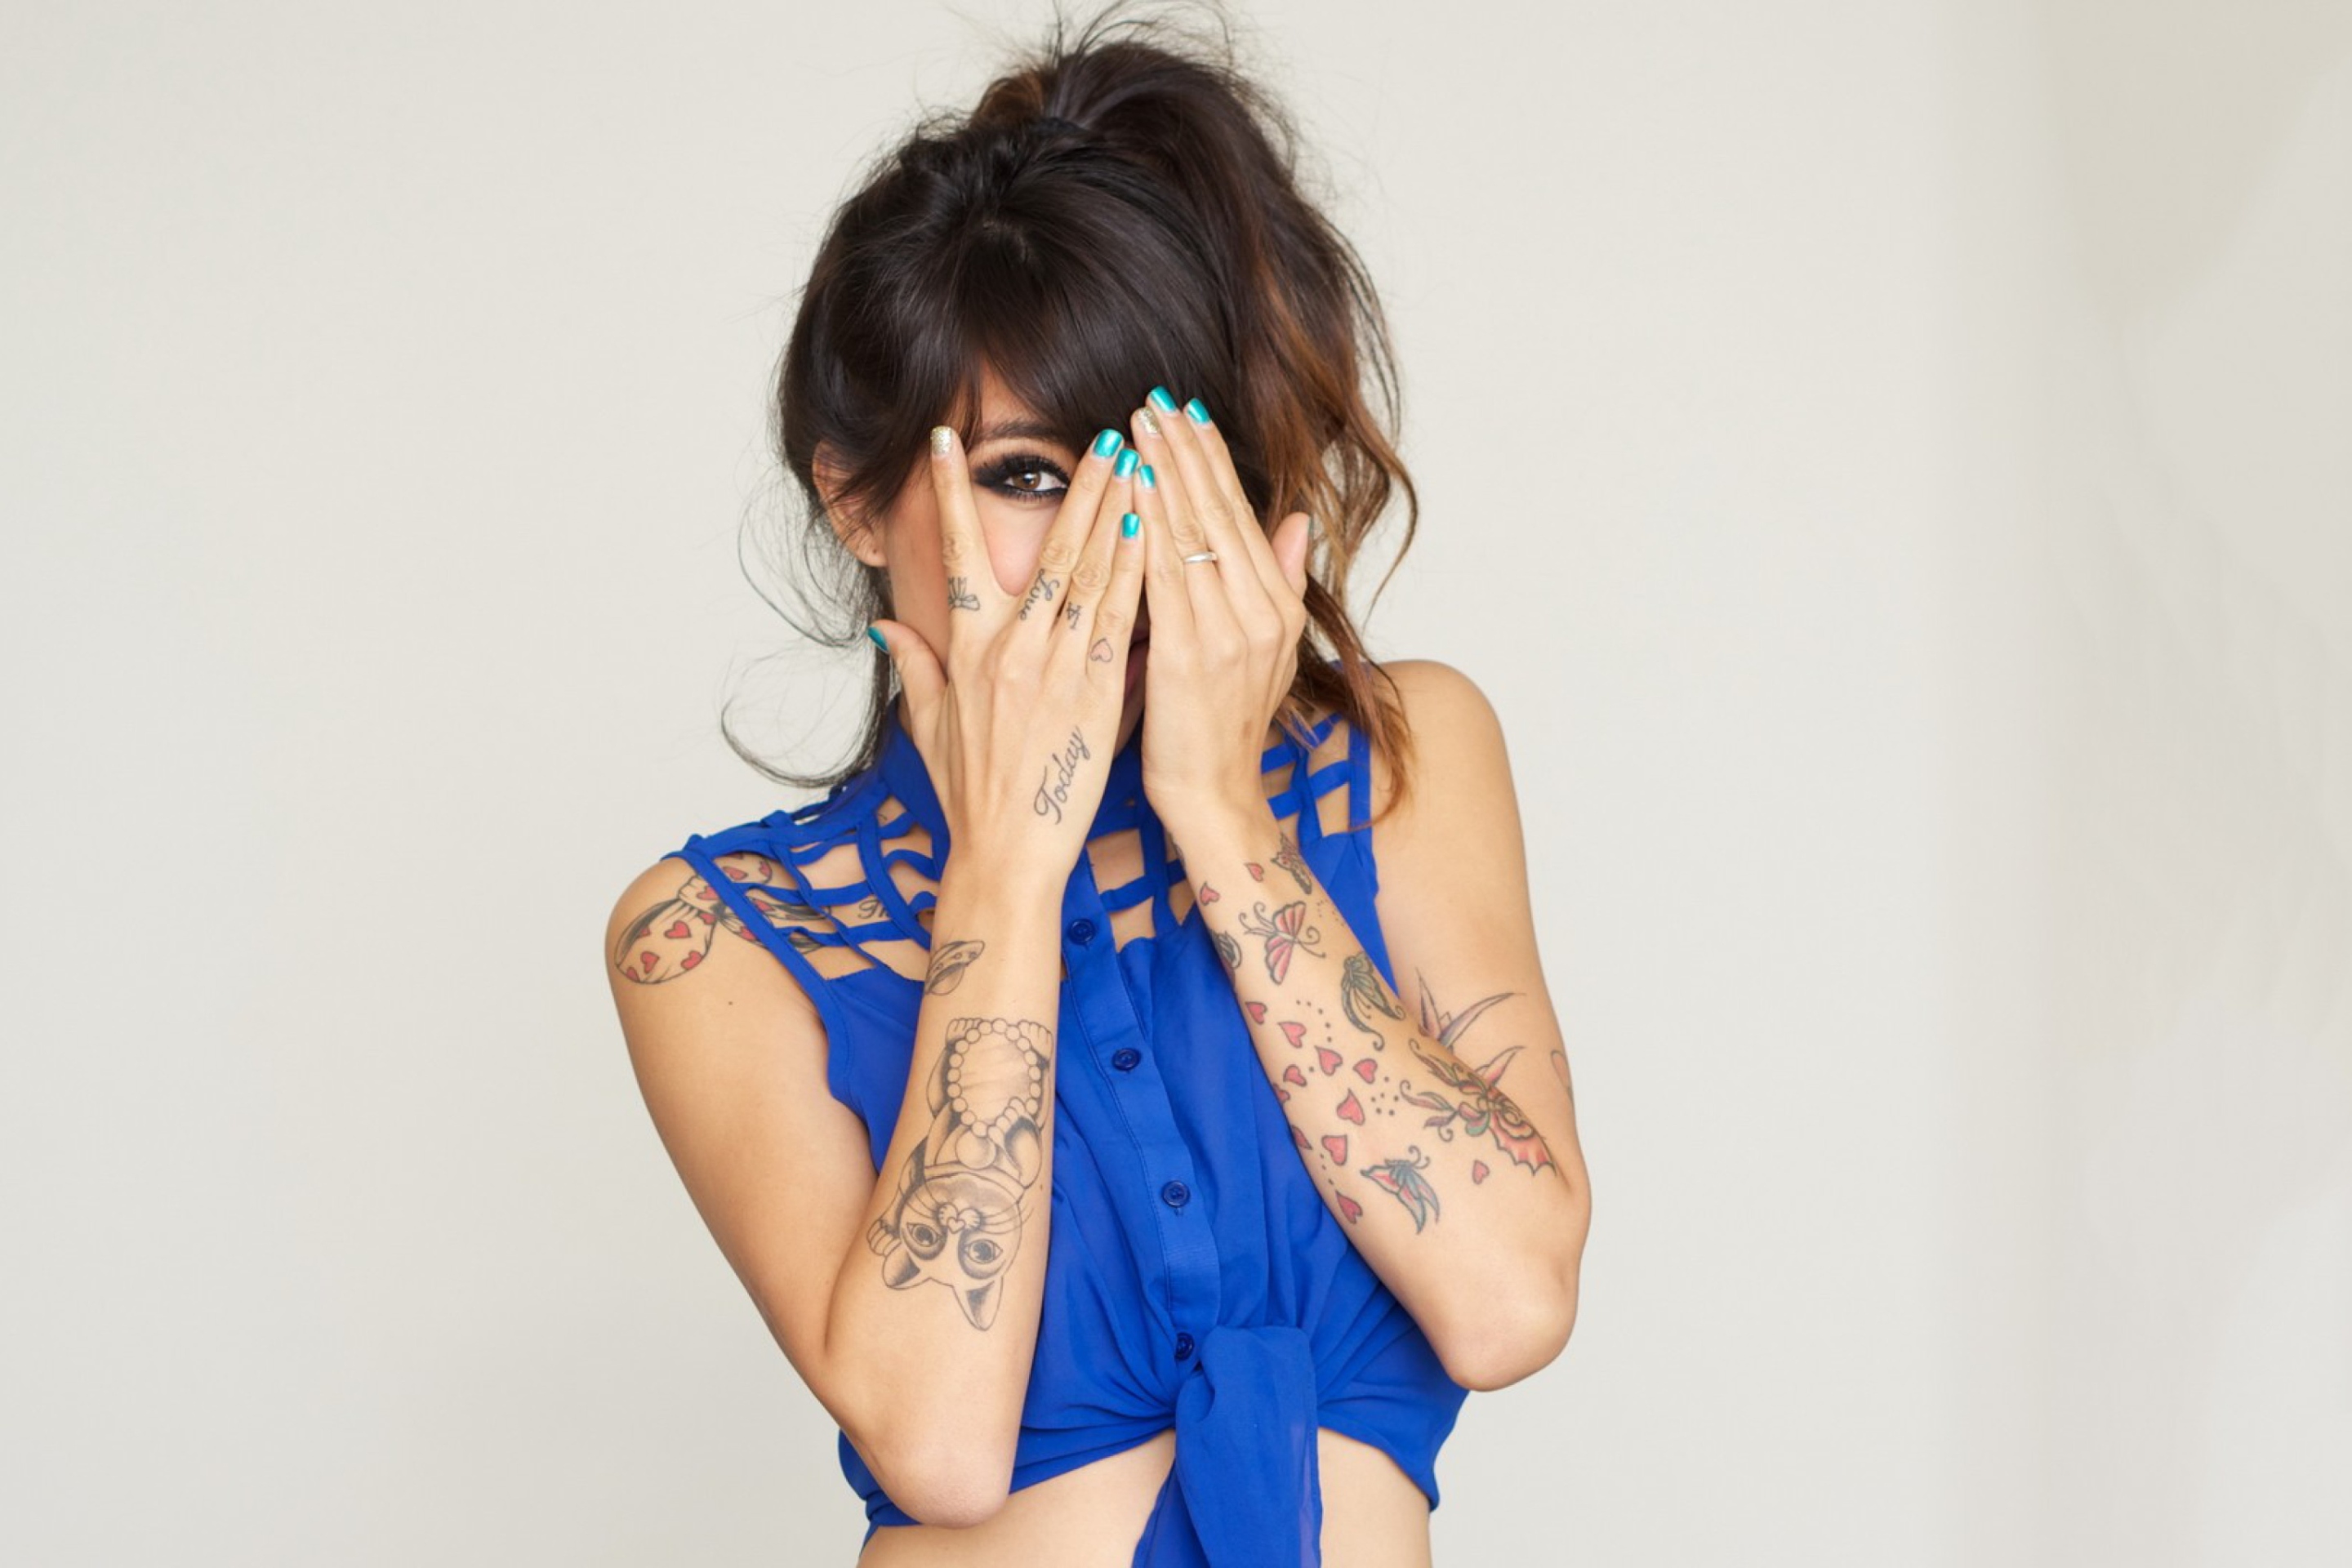 Girl With Tattoos wallpaper 2880x1920